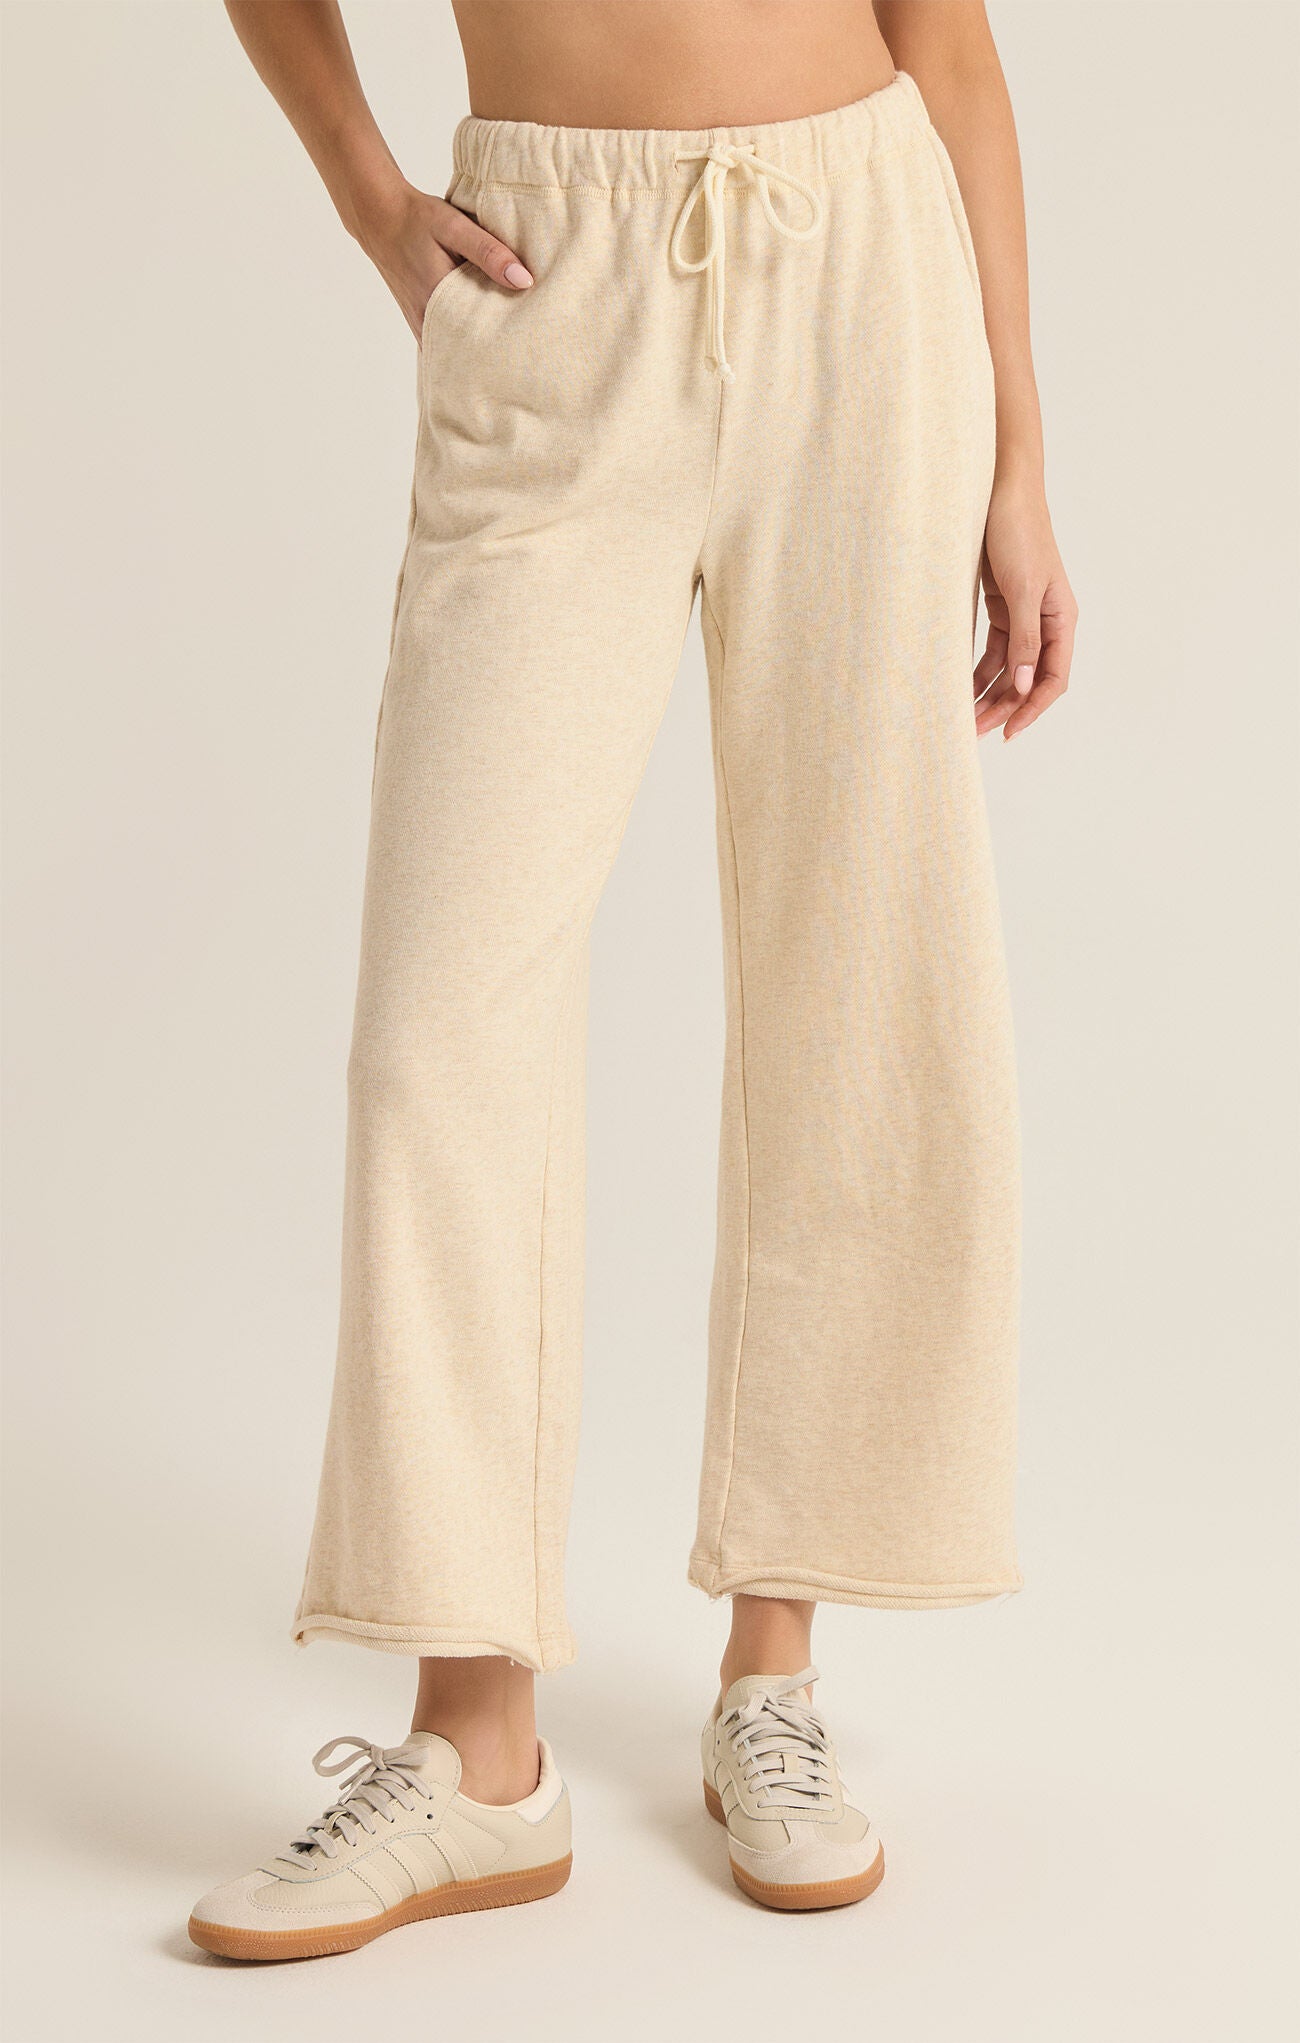 Z Supply Huntington French Terry Pant